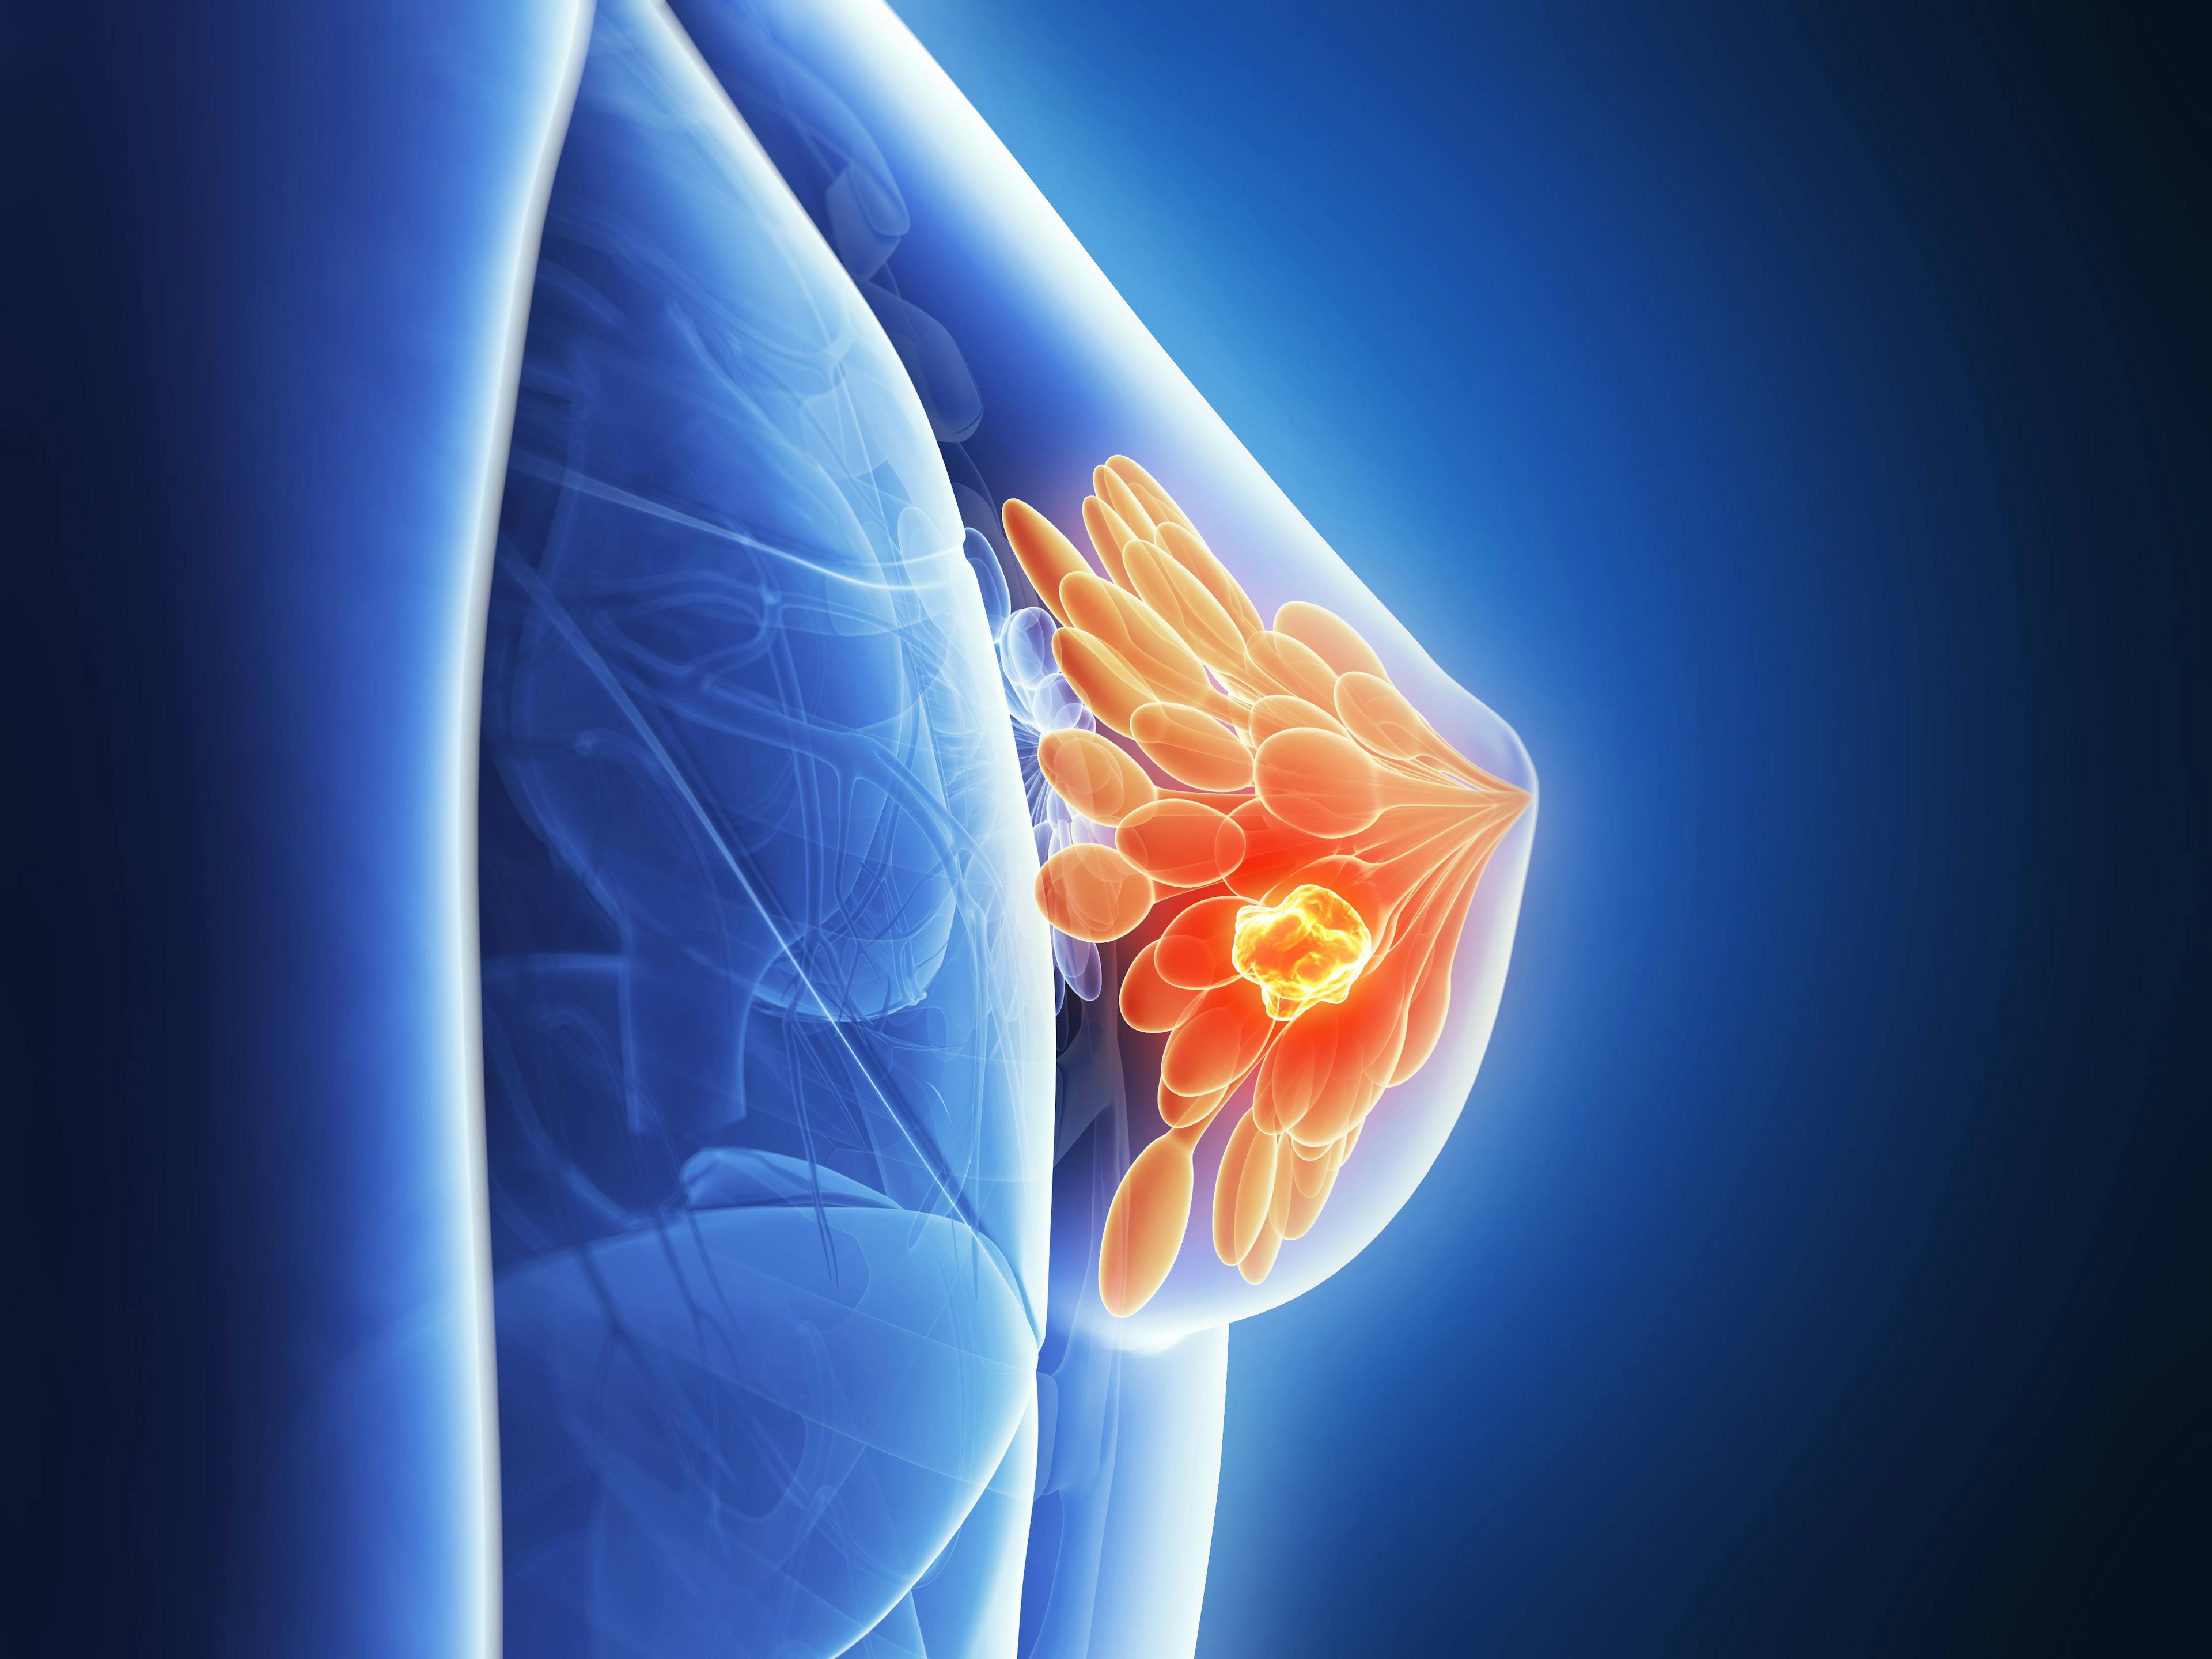 3D rendering of breast cancer - stock.adobe.com